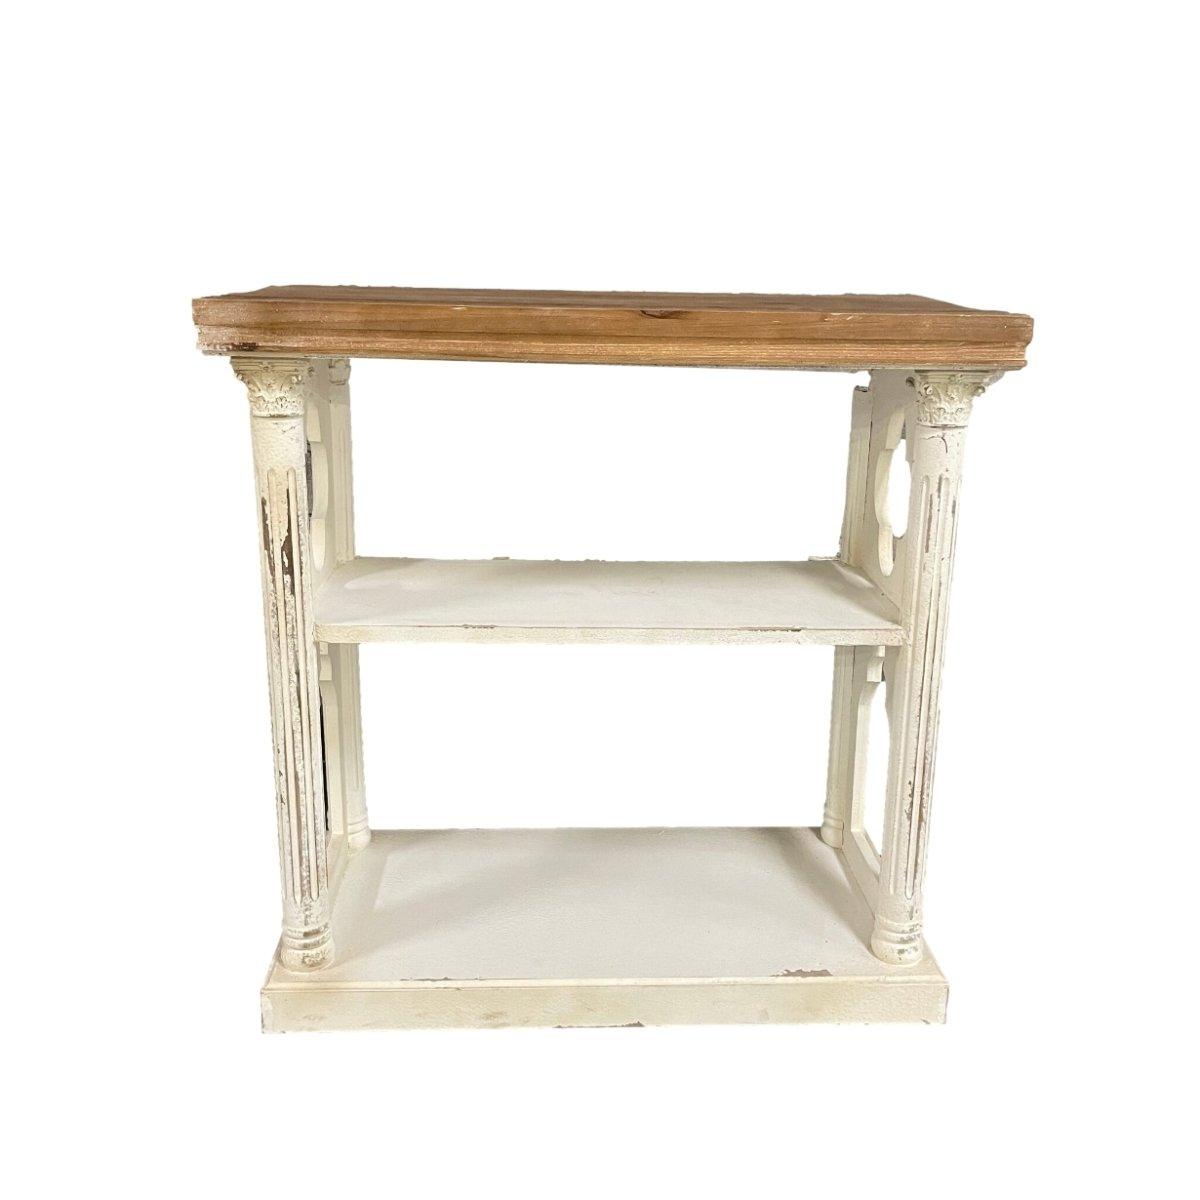 Jack Distressed White Wood Console Table - Rustic Furniture Outlet